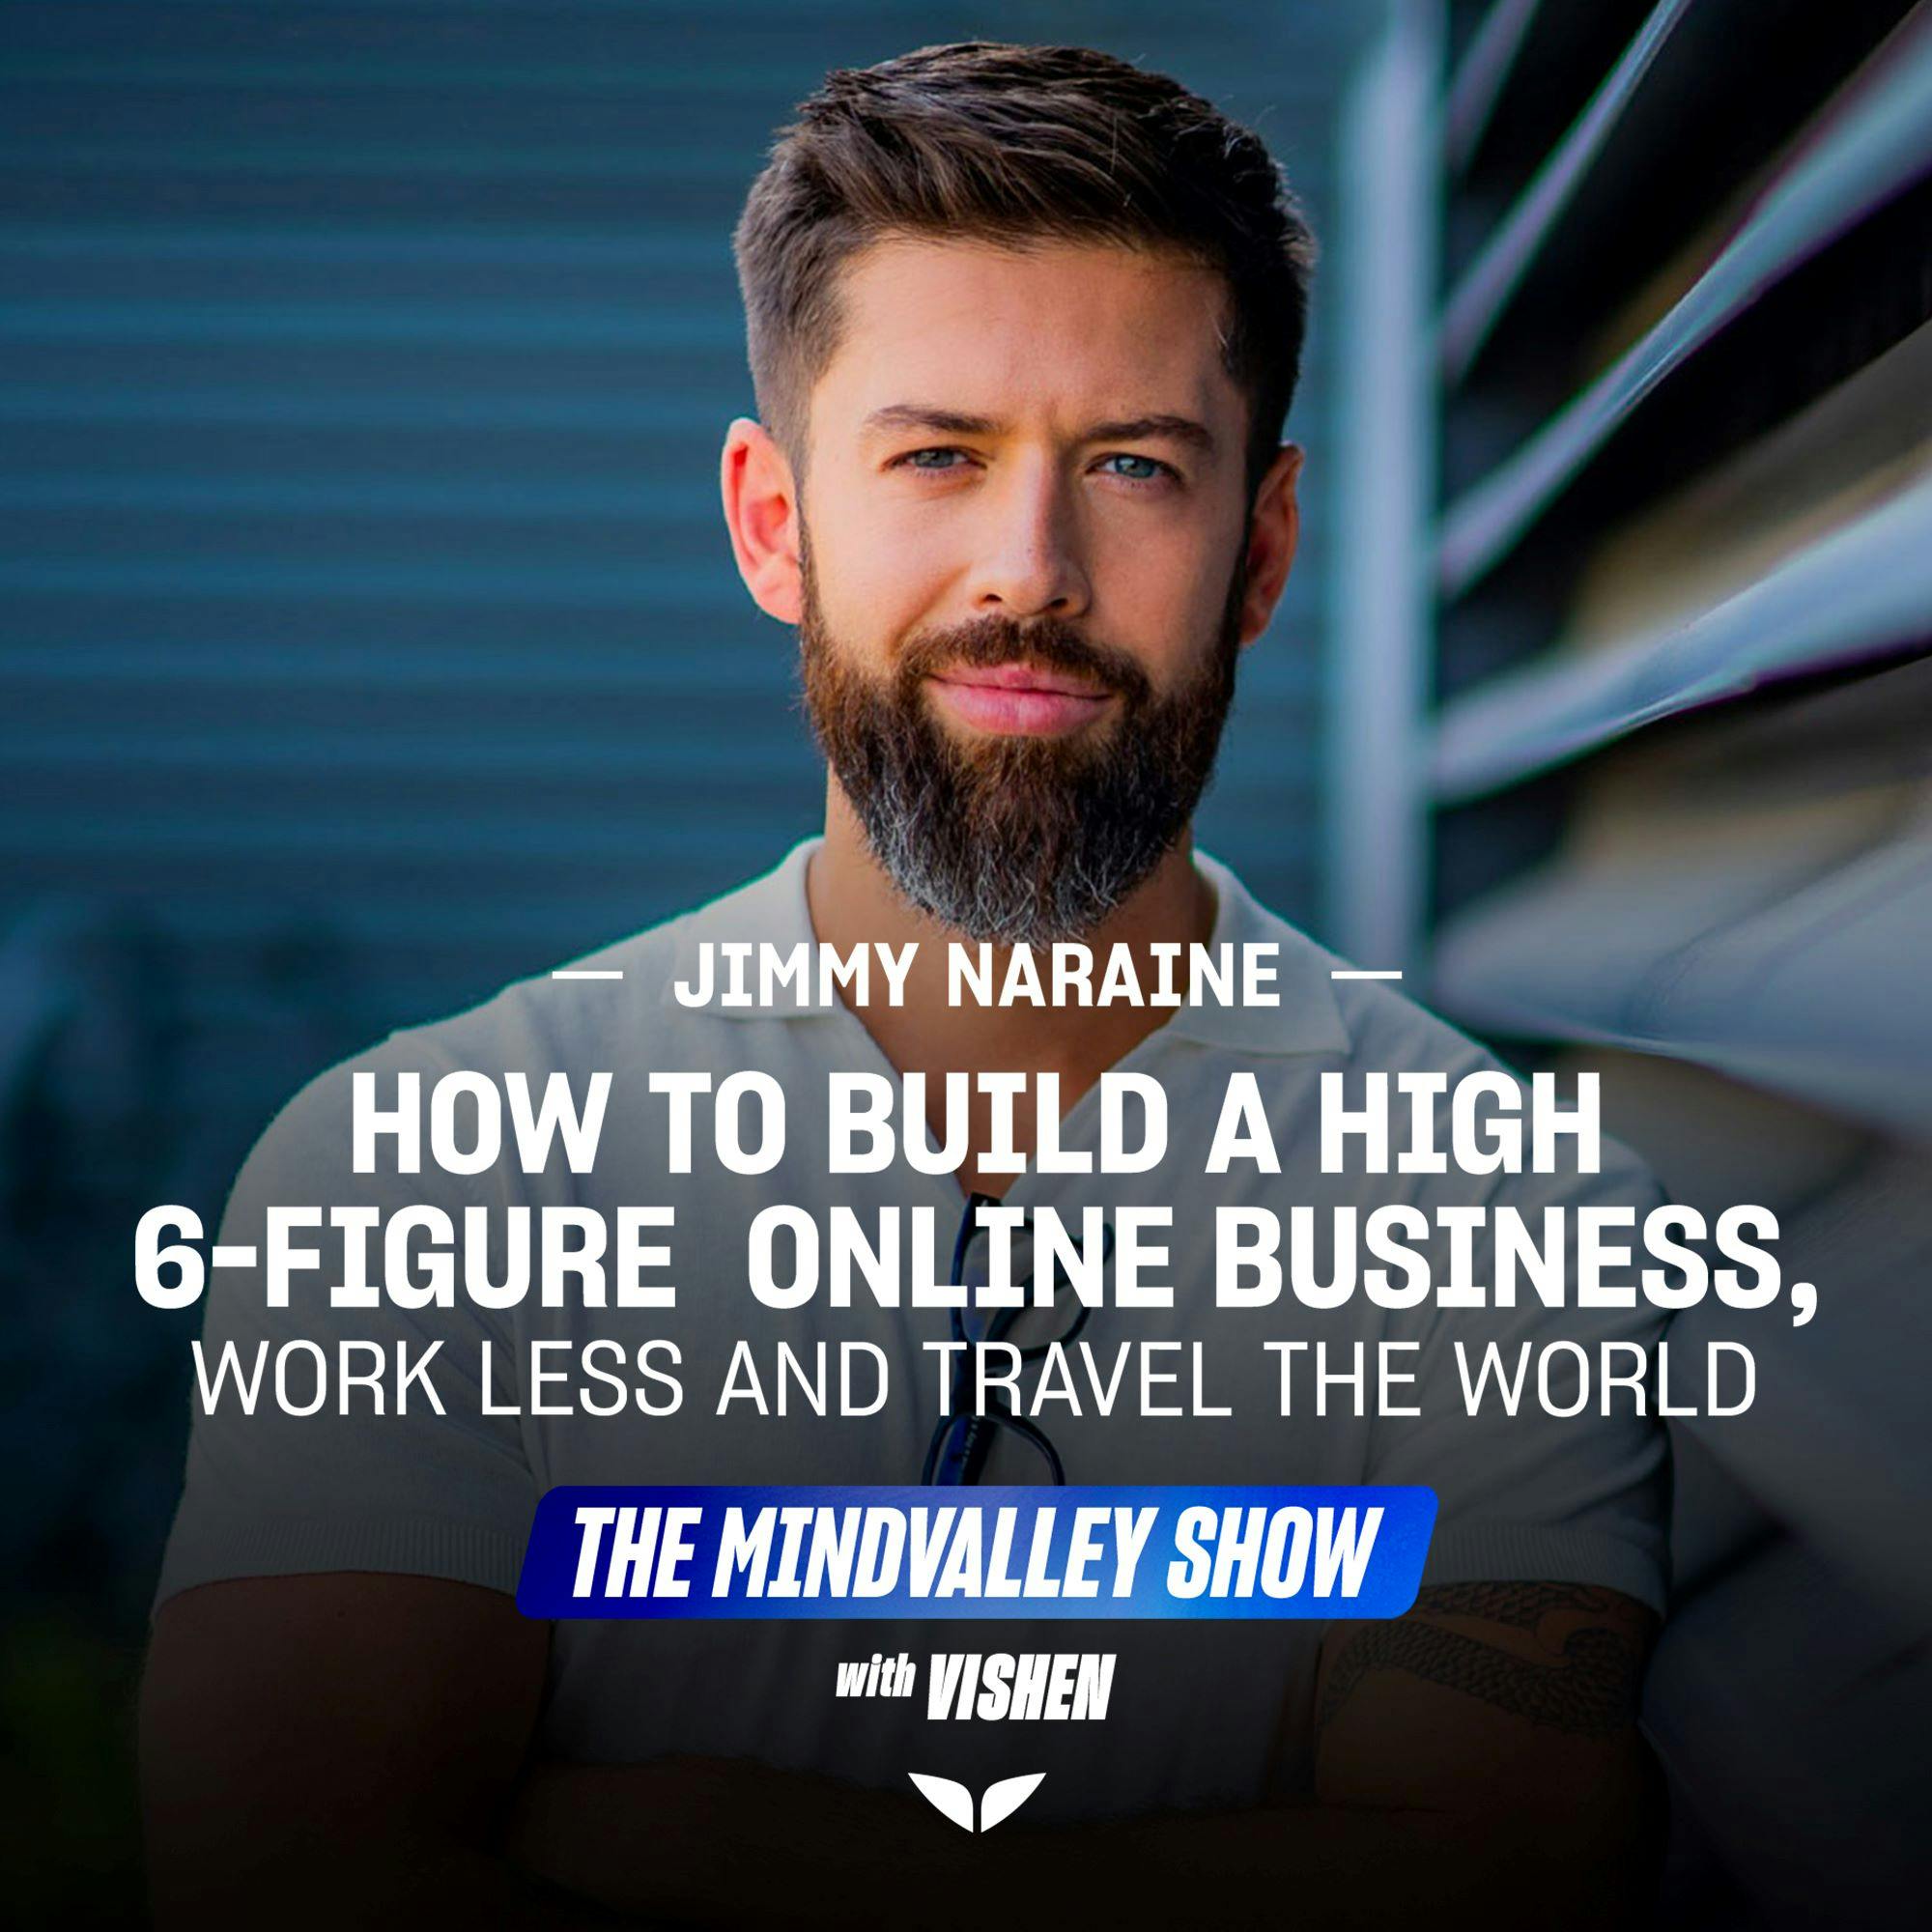 How To Build A High 6-Figure Online Business, Work Less and Travel The World